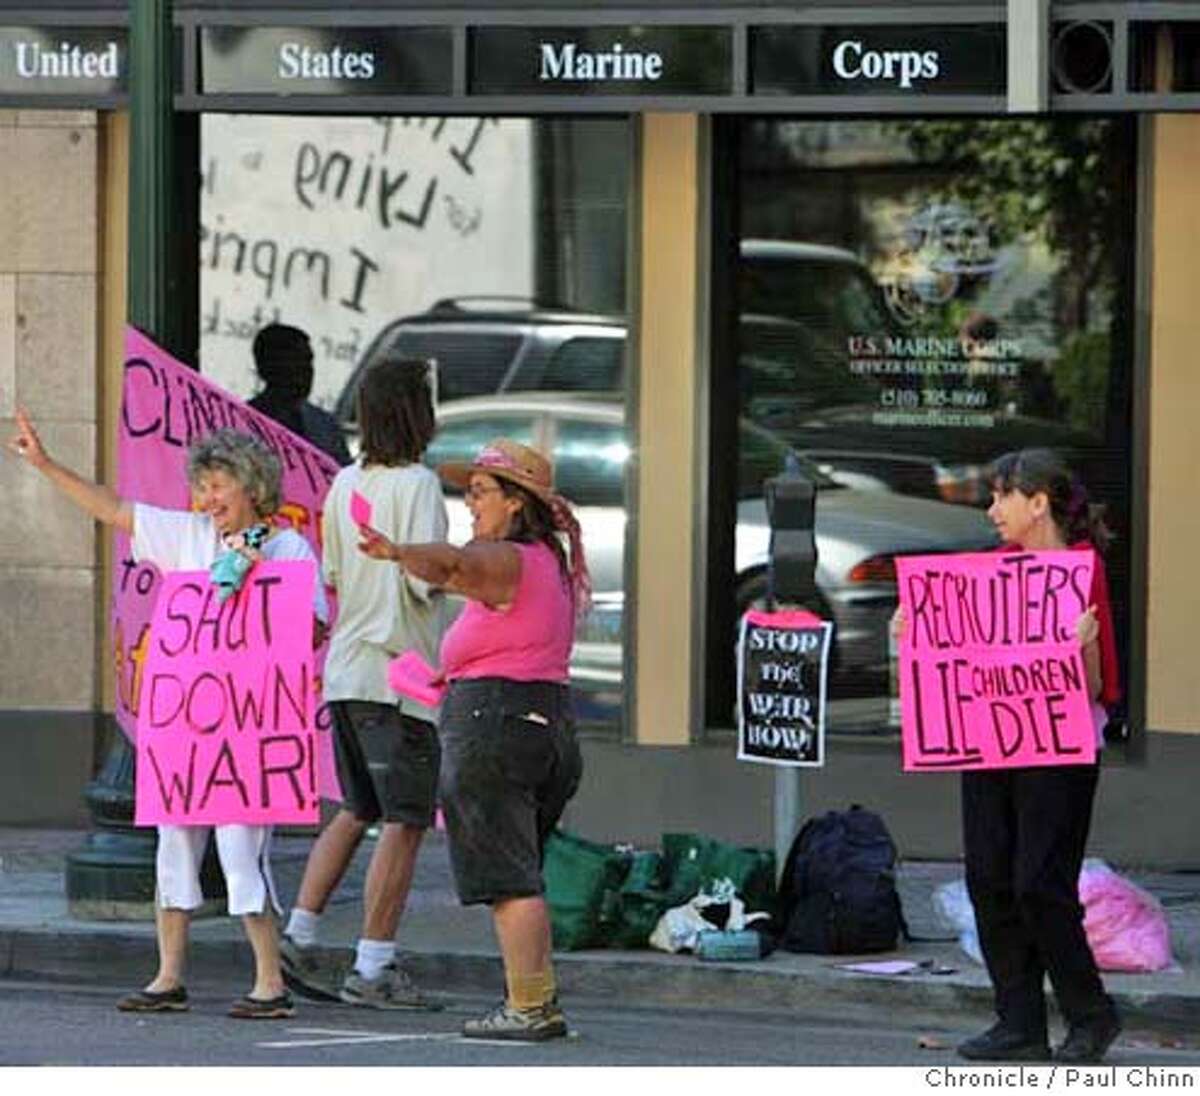 Demonstrators from Code Pink protest in front of a Marine Corps recruiting office in Berkeley, Calif. on Wednesday, Oct. 3, 2007. PAUL CHINN/The Chronicle